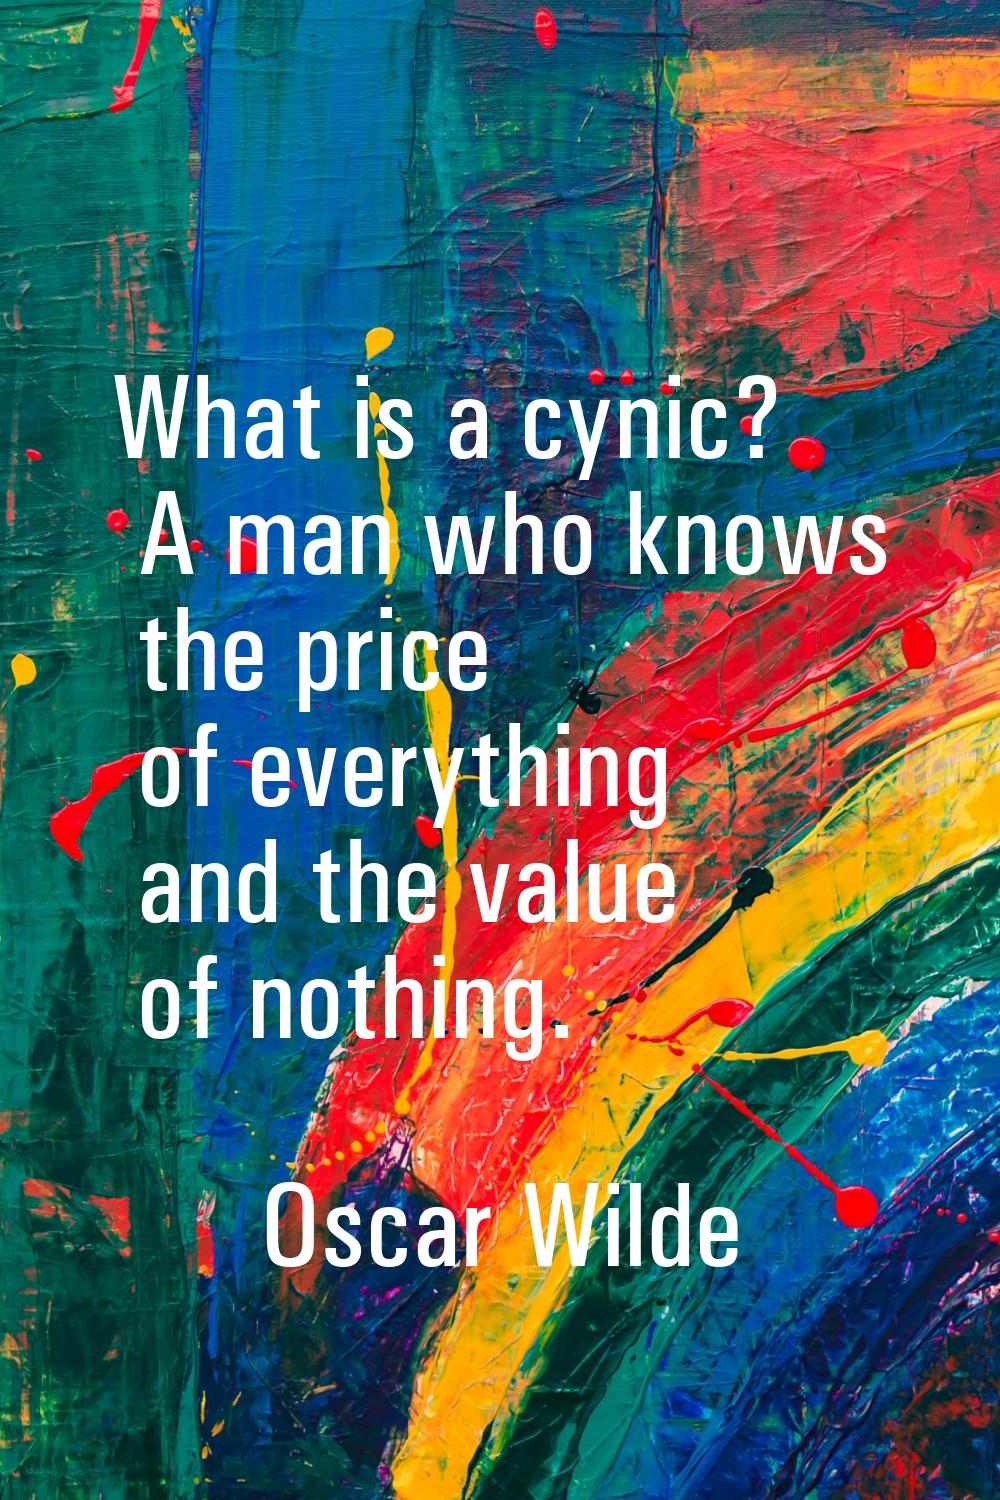 What is a cynic? A man who knows the price of everything and the value of nothing.